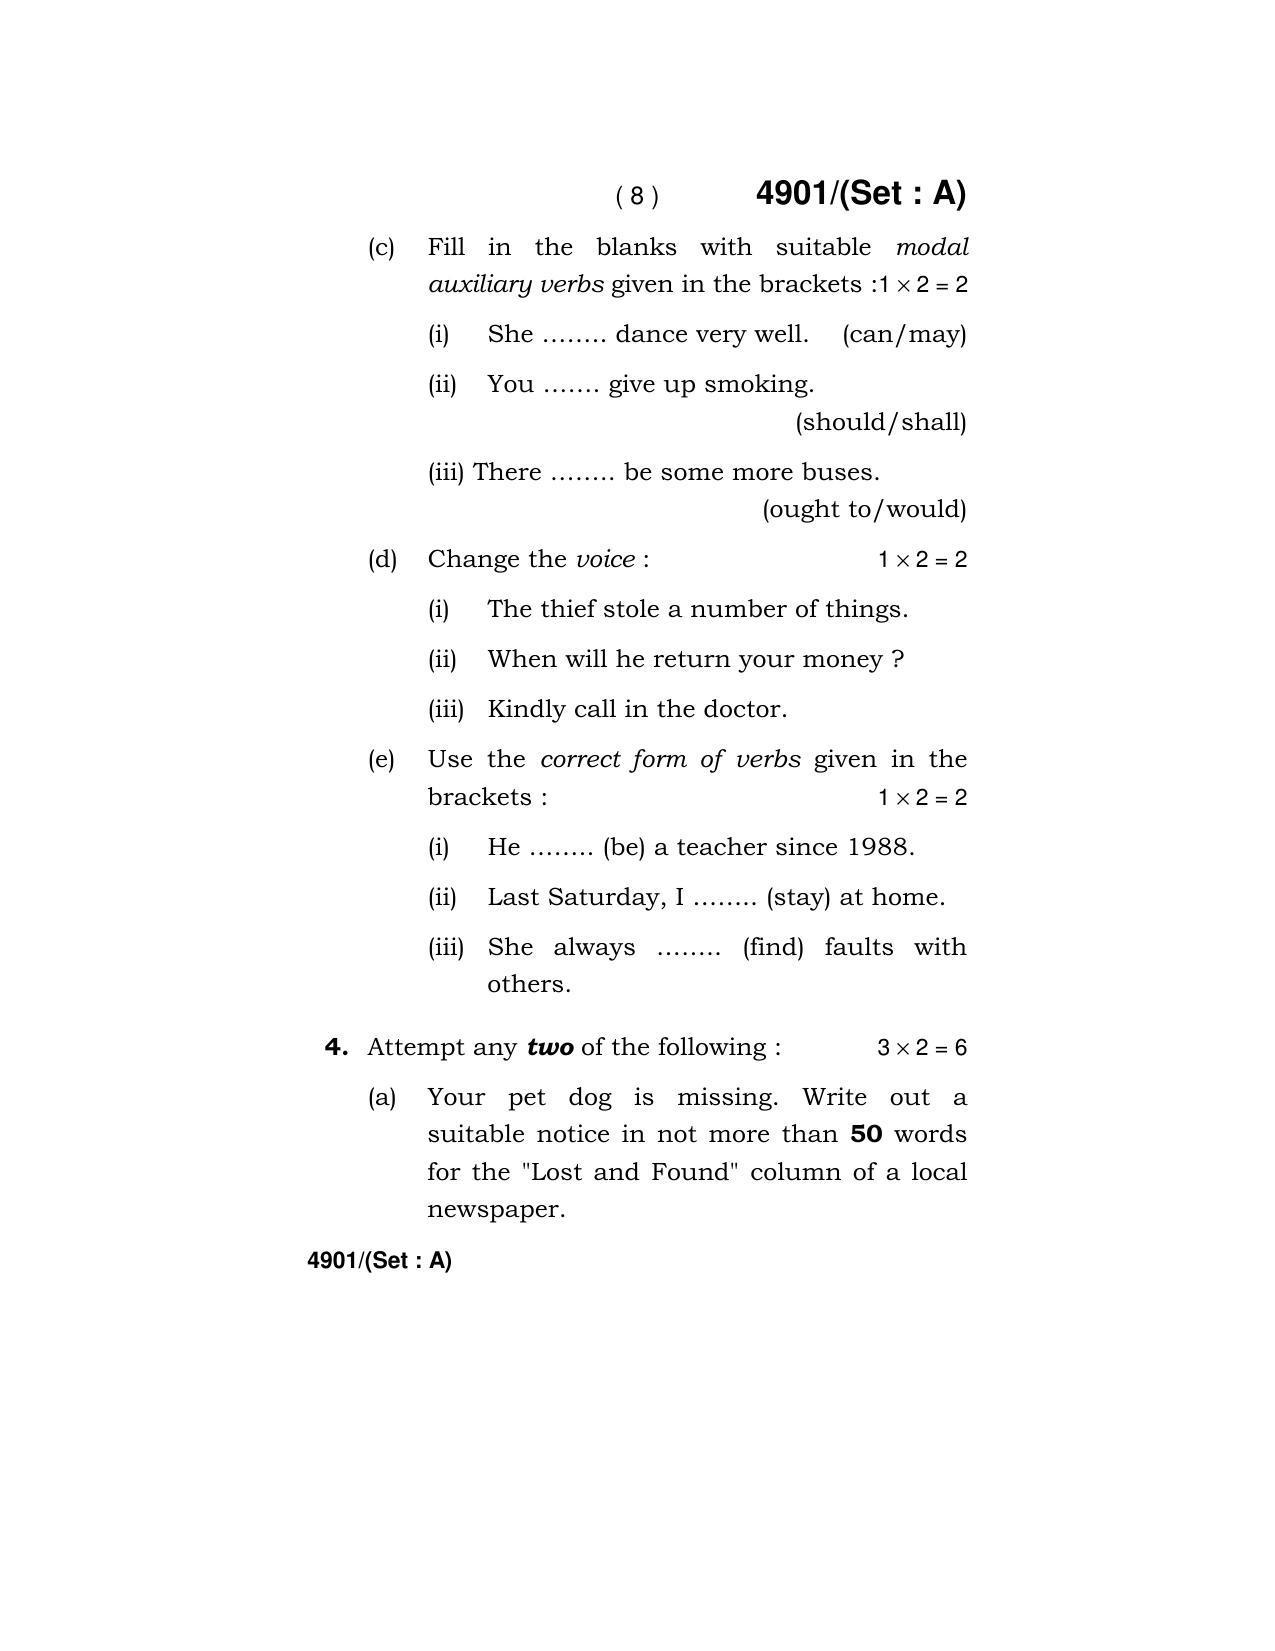 Haryana Board HBSE Class 12 English Core 2020 Question Paper - Page 8